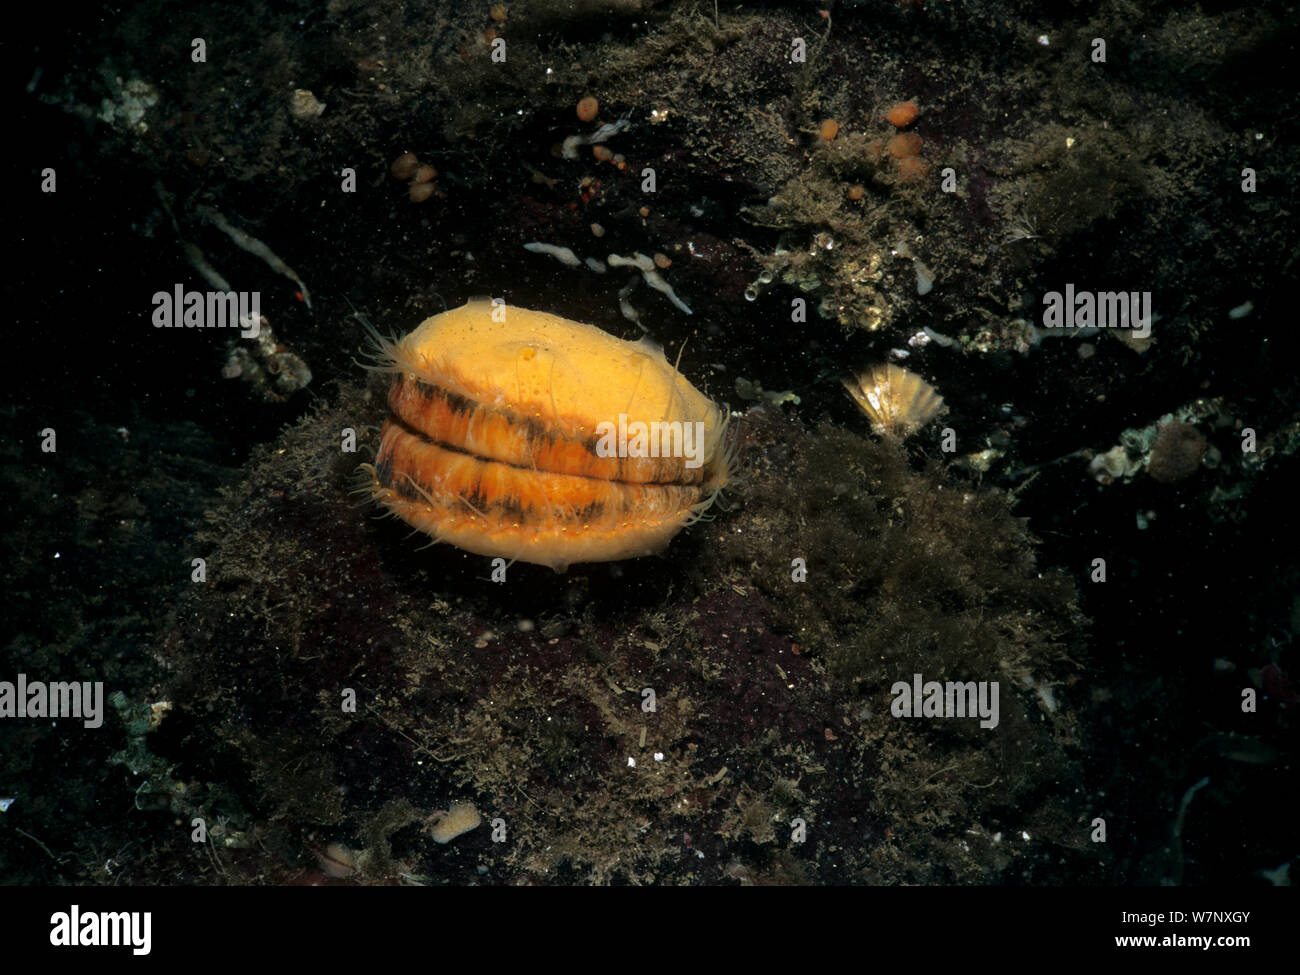 Spiny Pink Scallop (Chlamys hastata) encrusted with sponge, Vancouver Island, British Columbia, Canada, Pacific Ocean Stock Photo